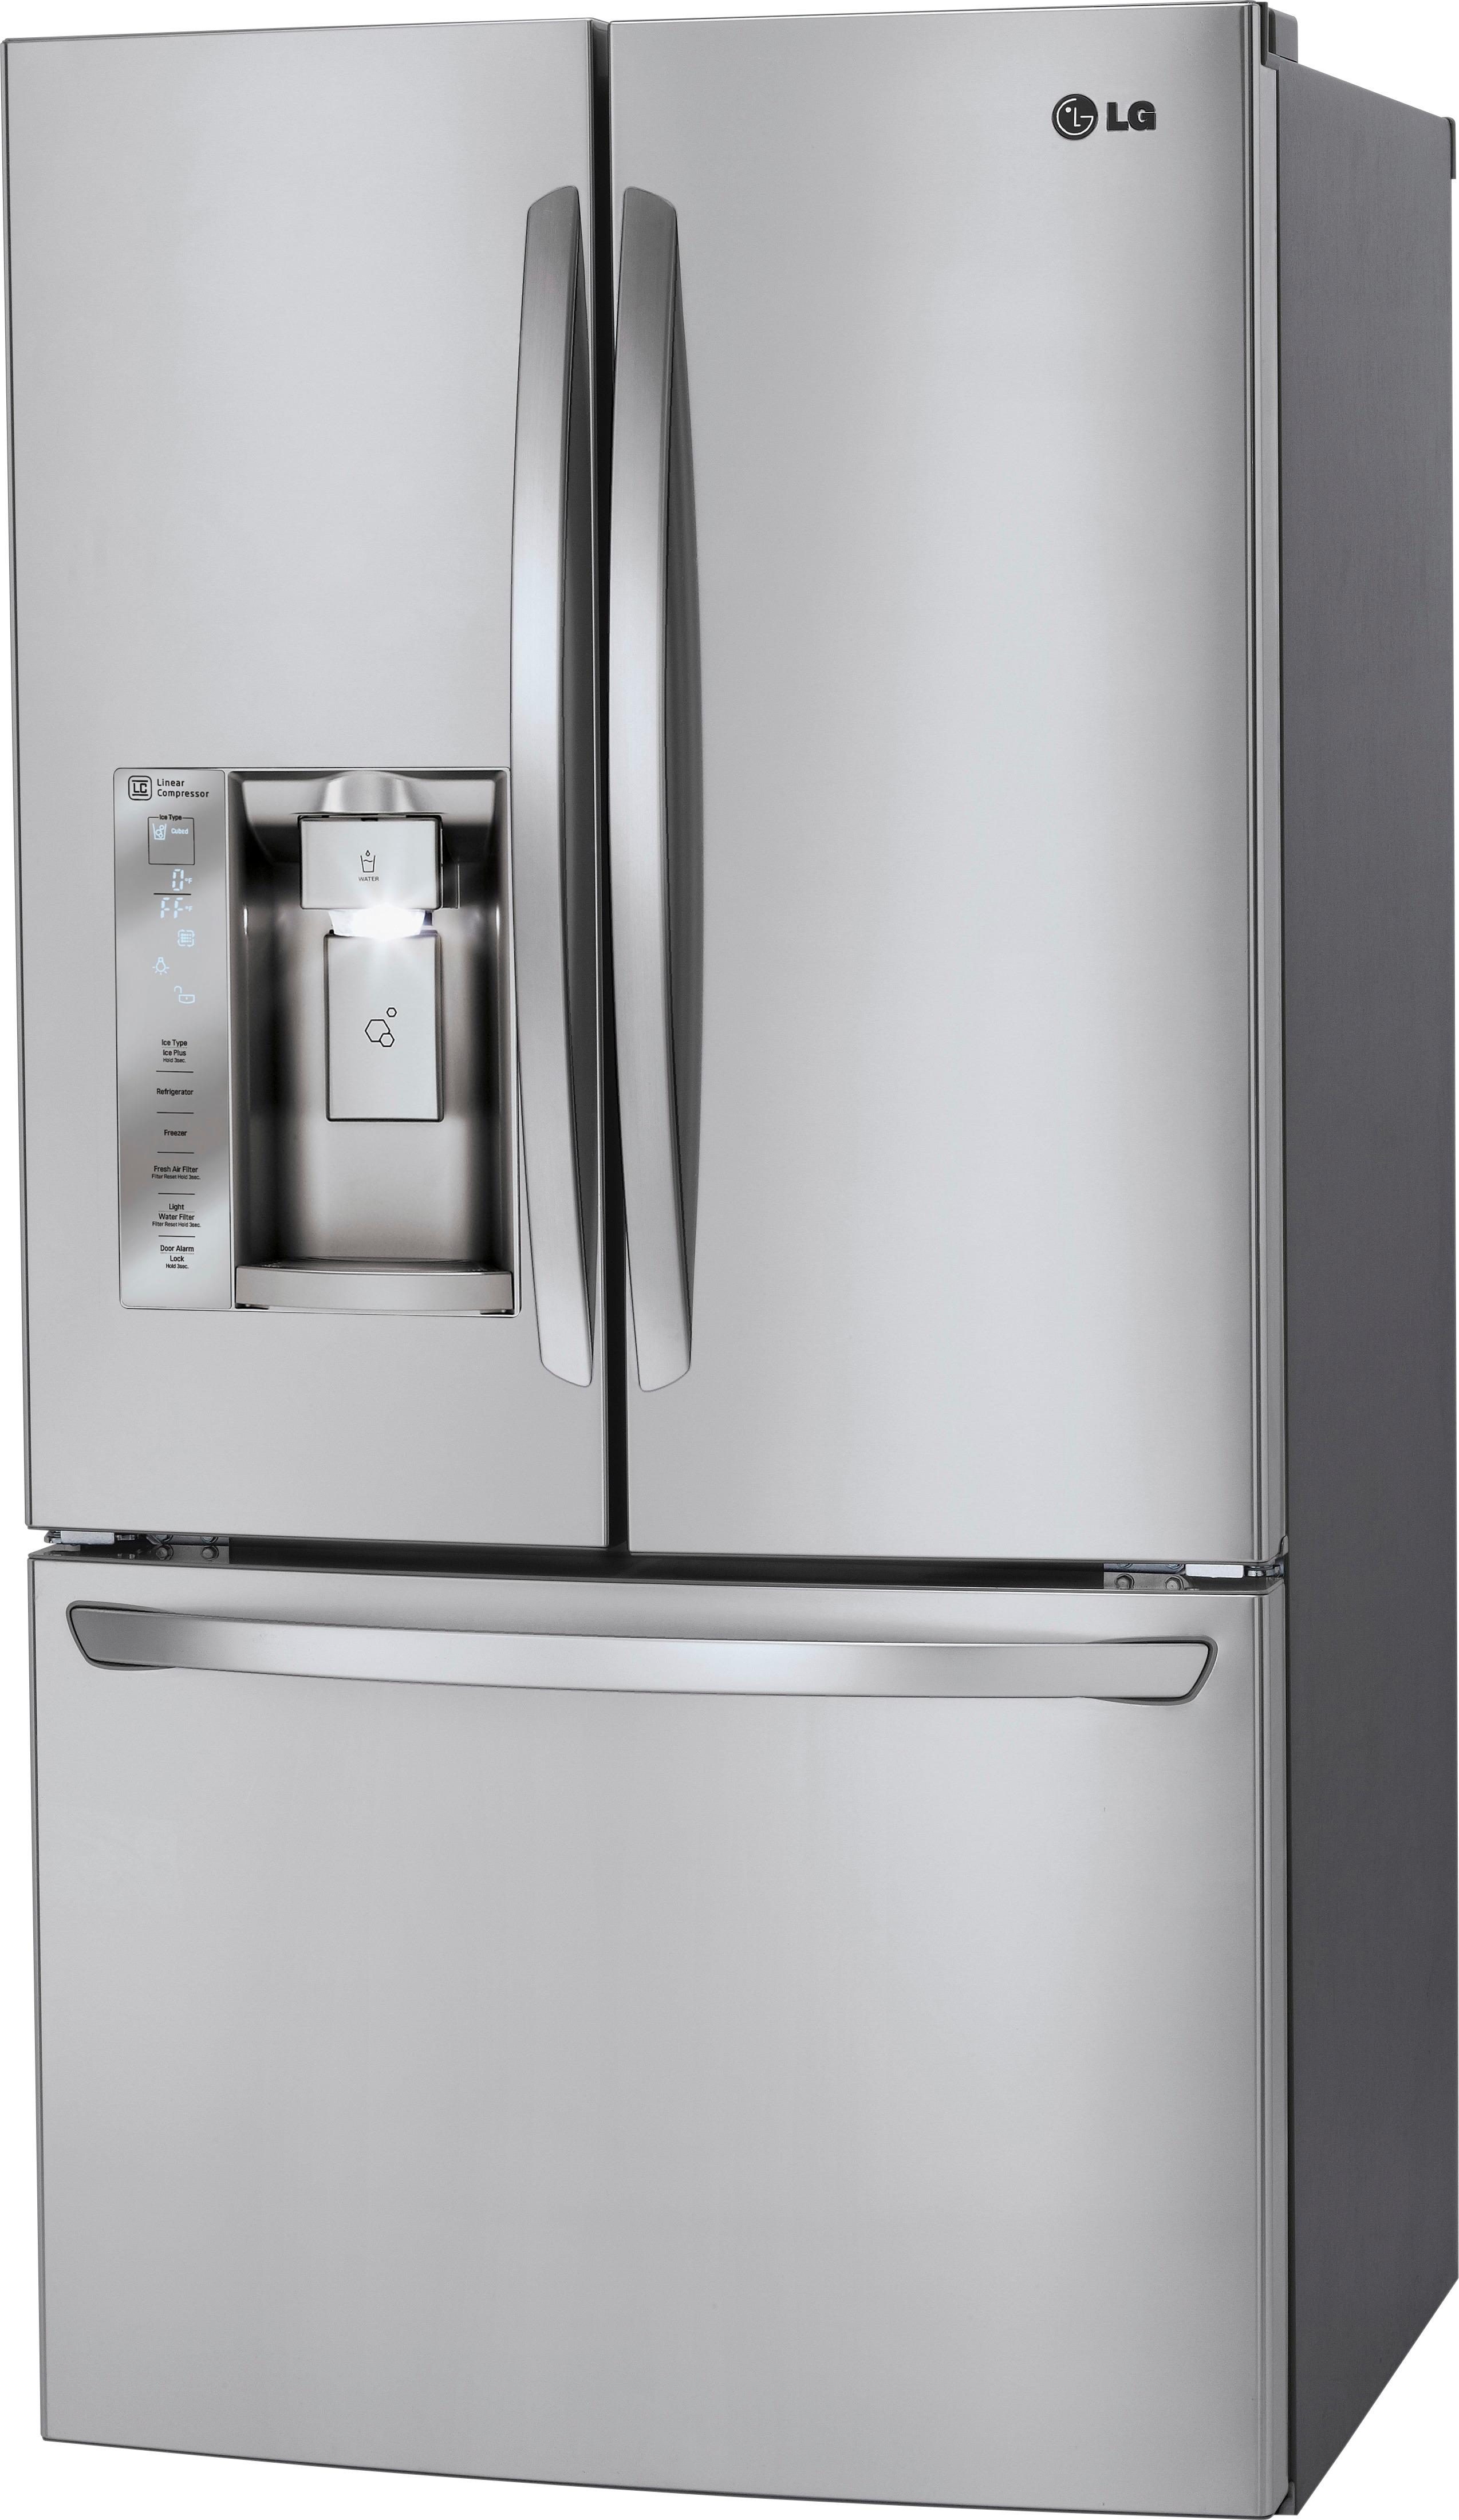 22+ Lg fridge and freezer not cold enough information